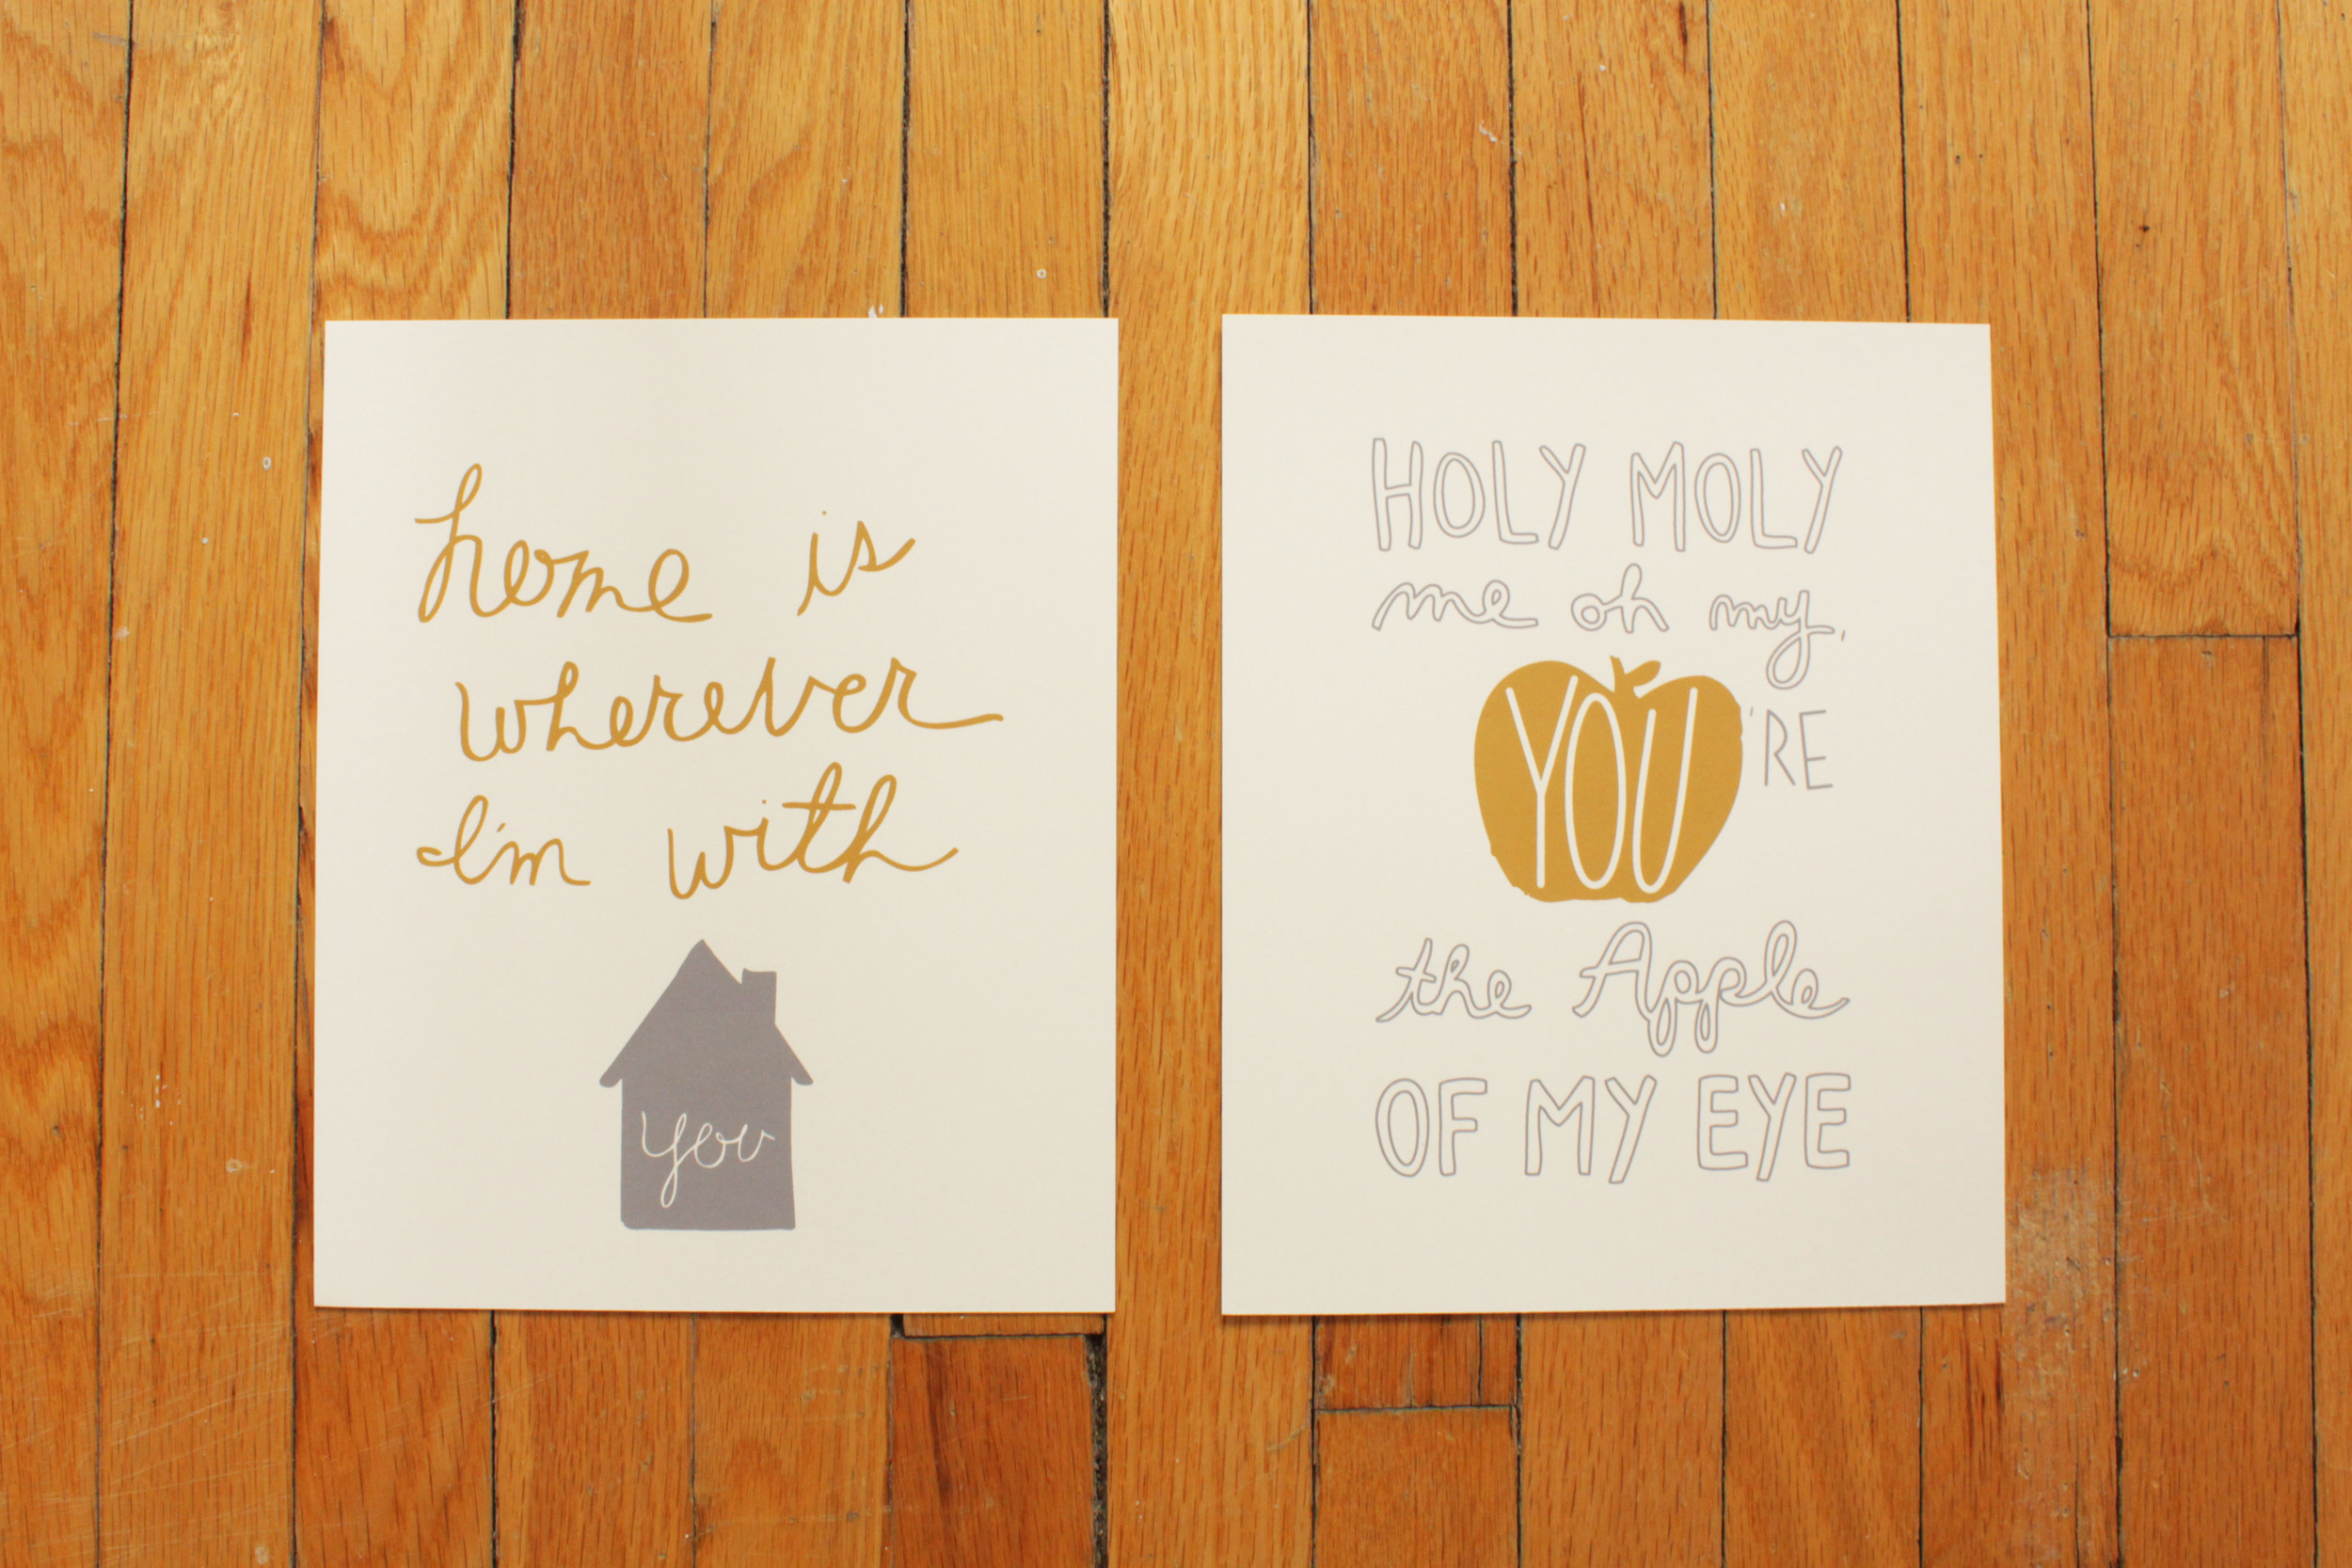  Image of two custom designed art prints featuring lyrics from “Home” by Edward Sharpe and the Magnetic Zeros 